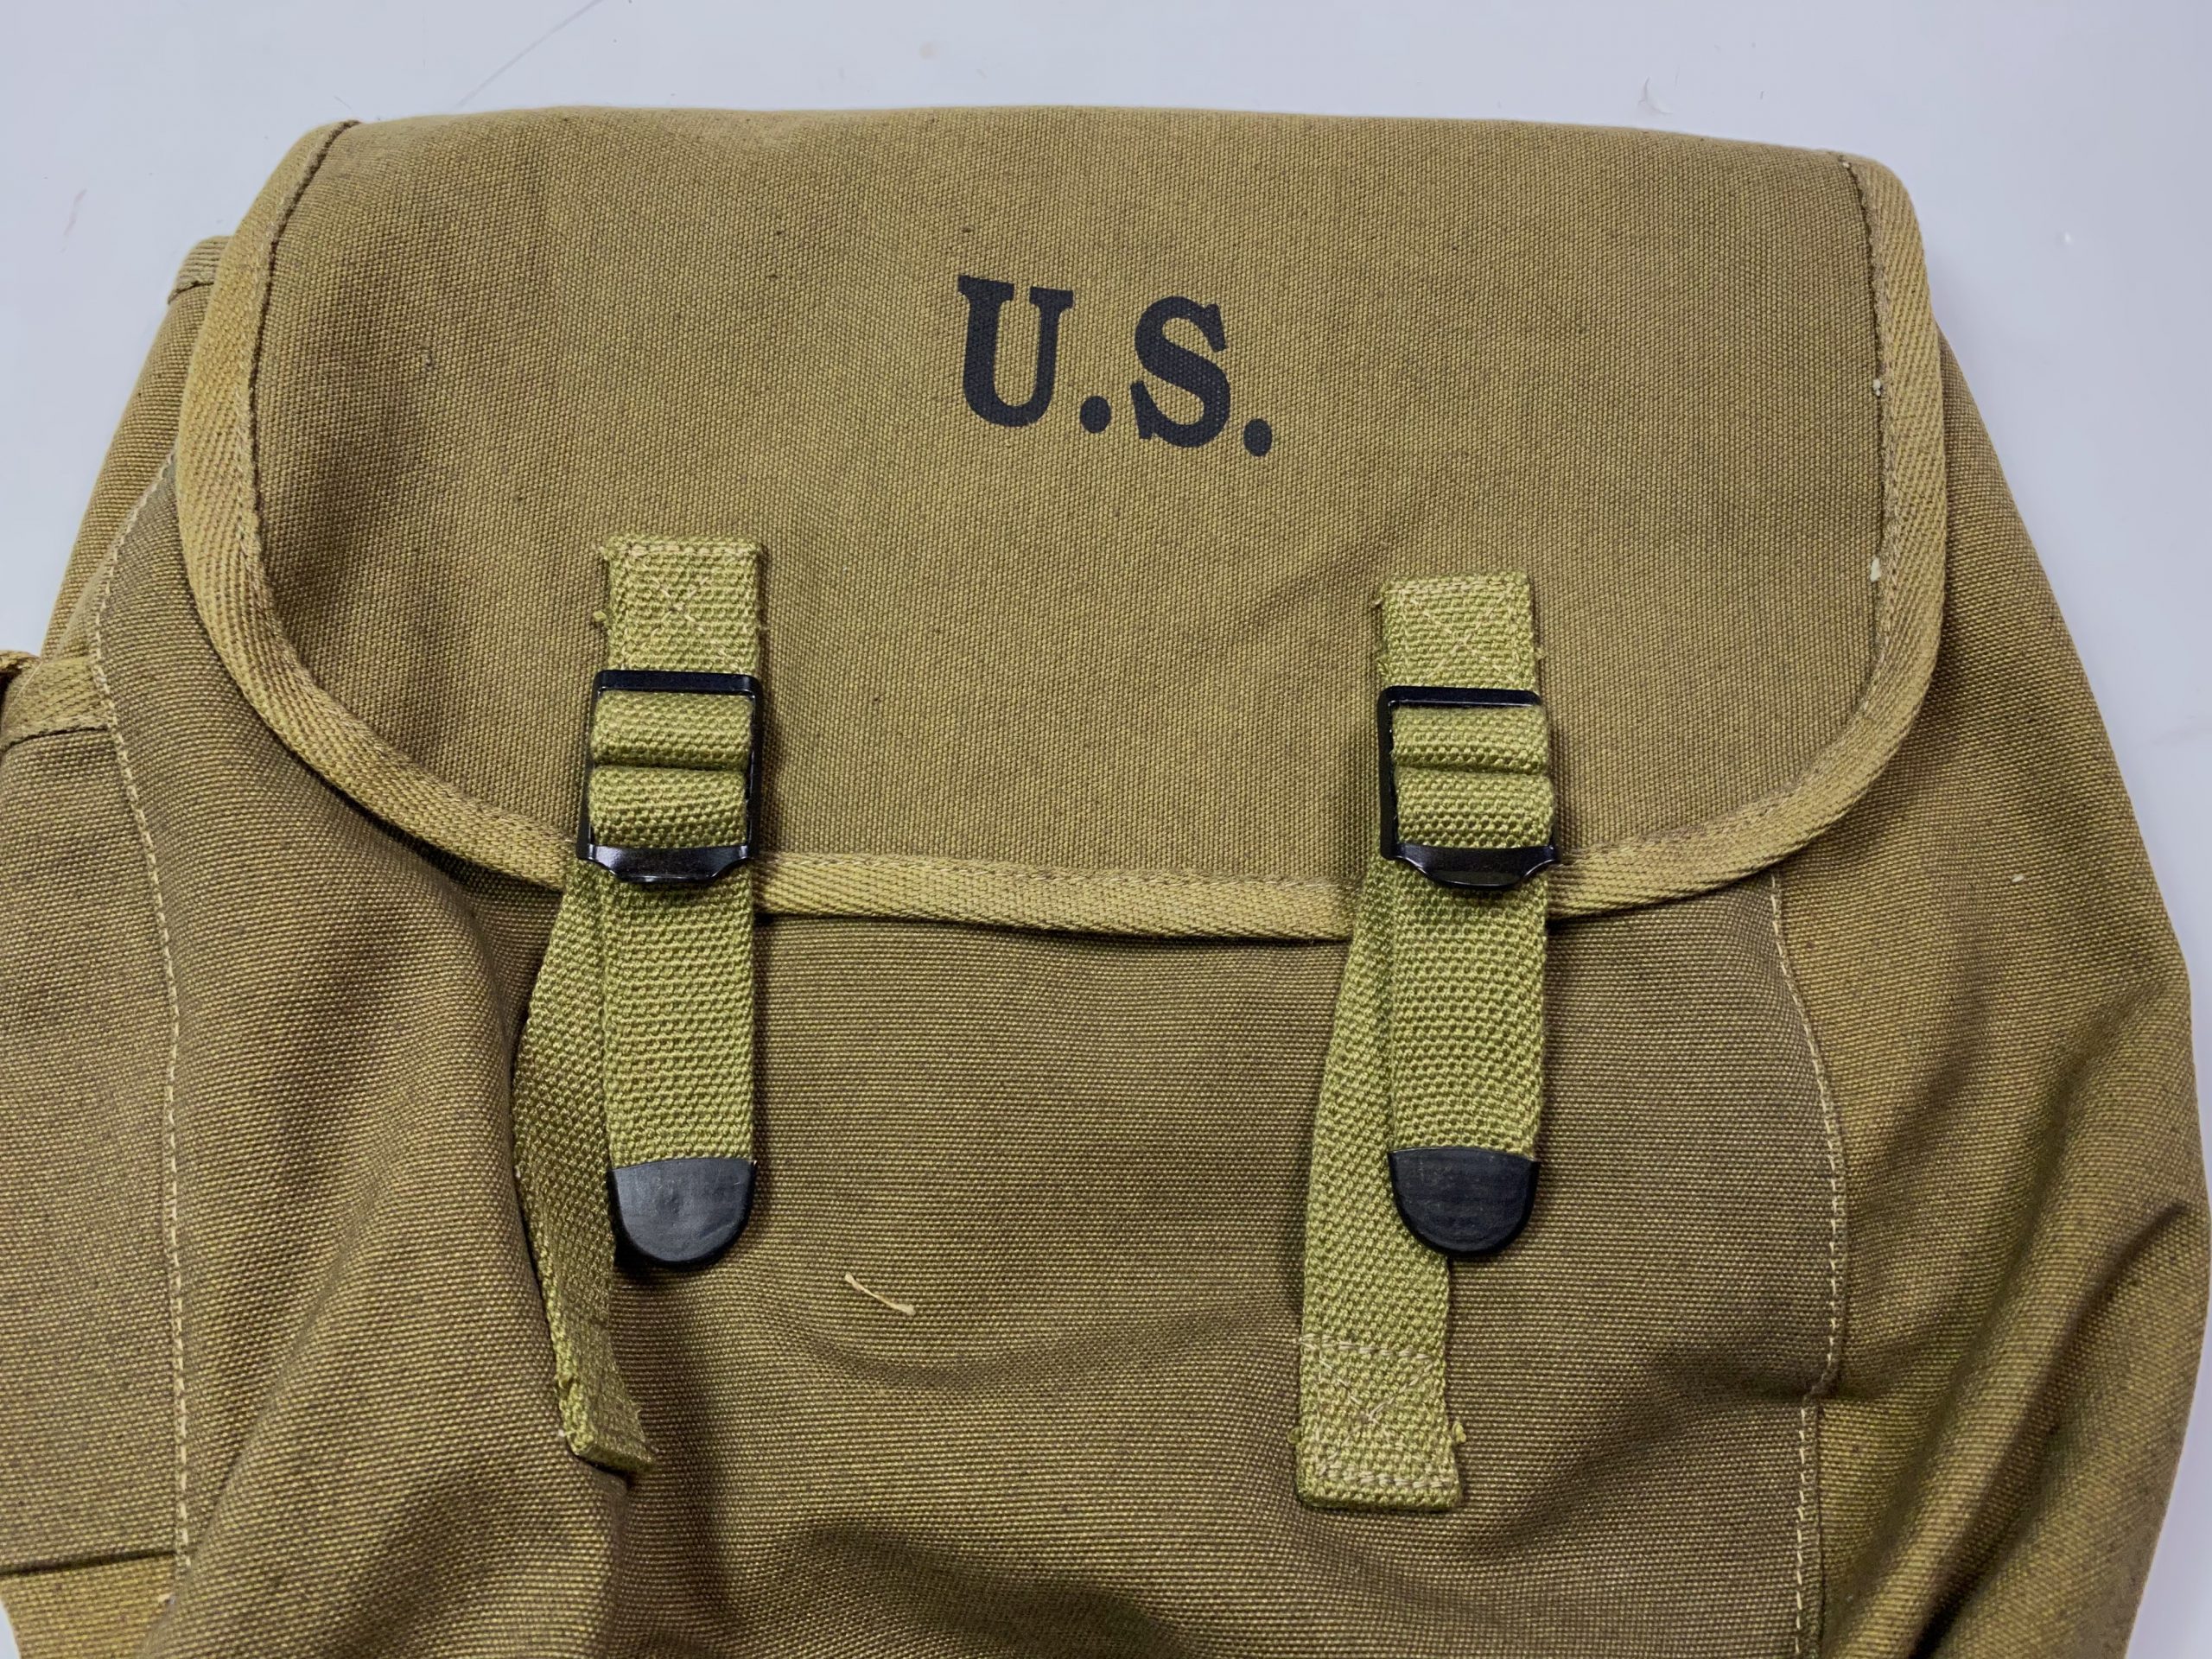 Early M-1936 Musette Bag (“POWERS & CO. 1941”) “Rubberized”